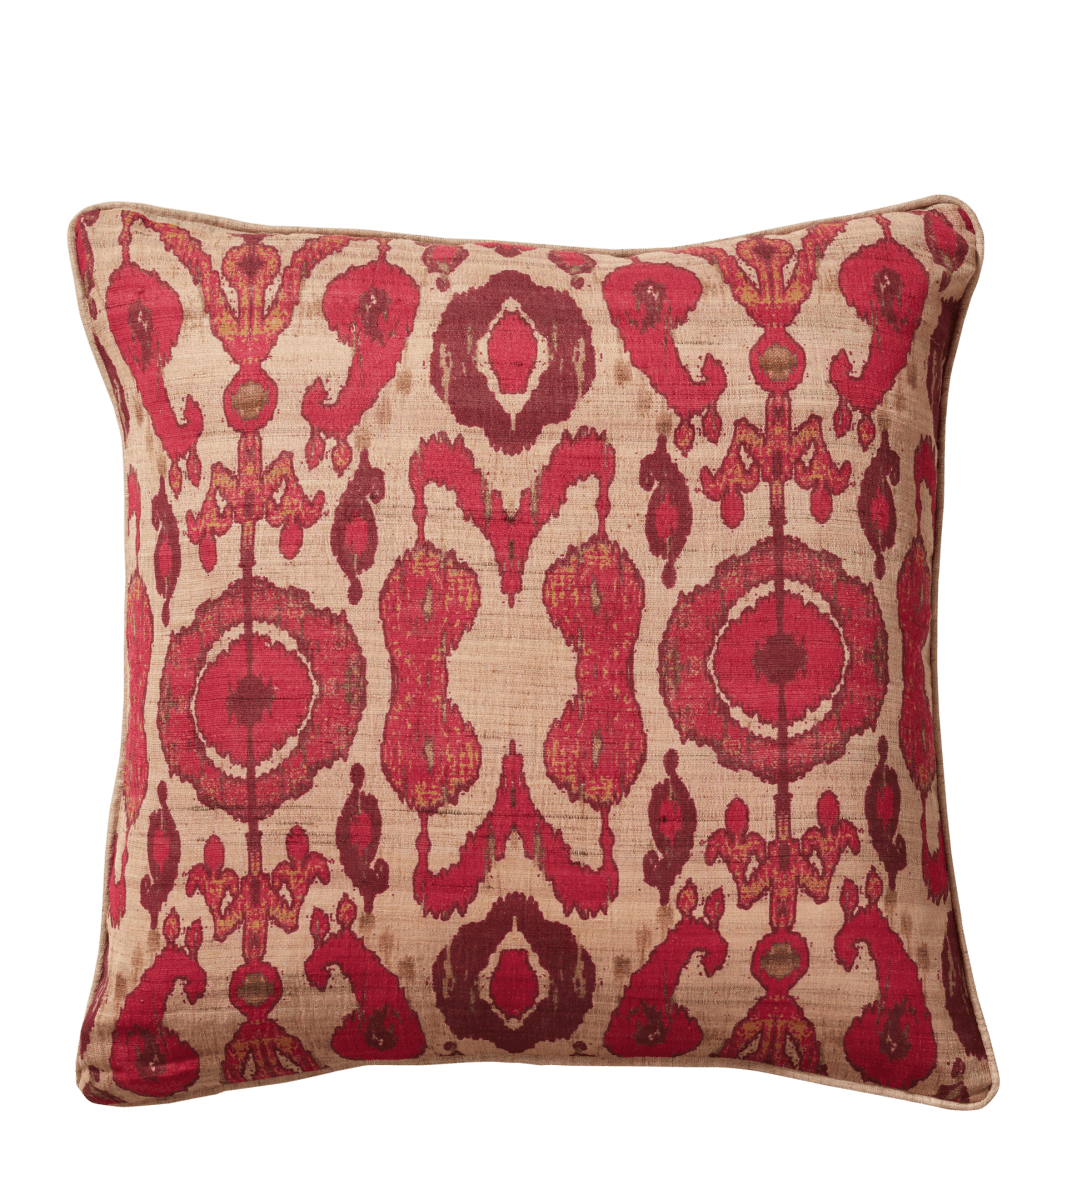 75 Paisley on Brown LINEN Cotton Cushion Cover.Various sizes 